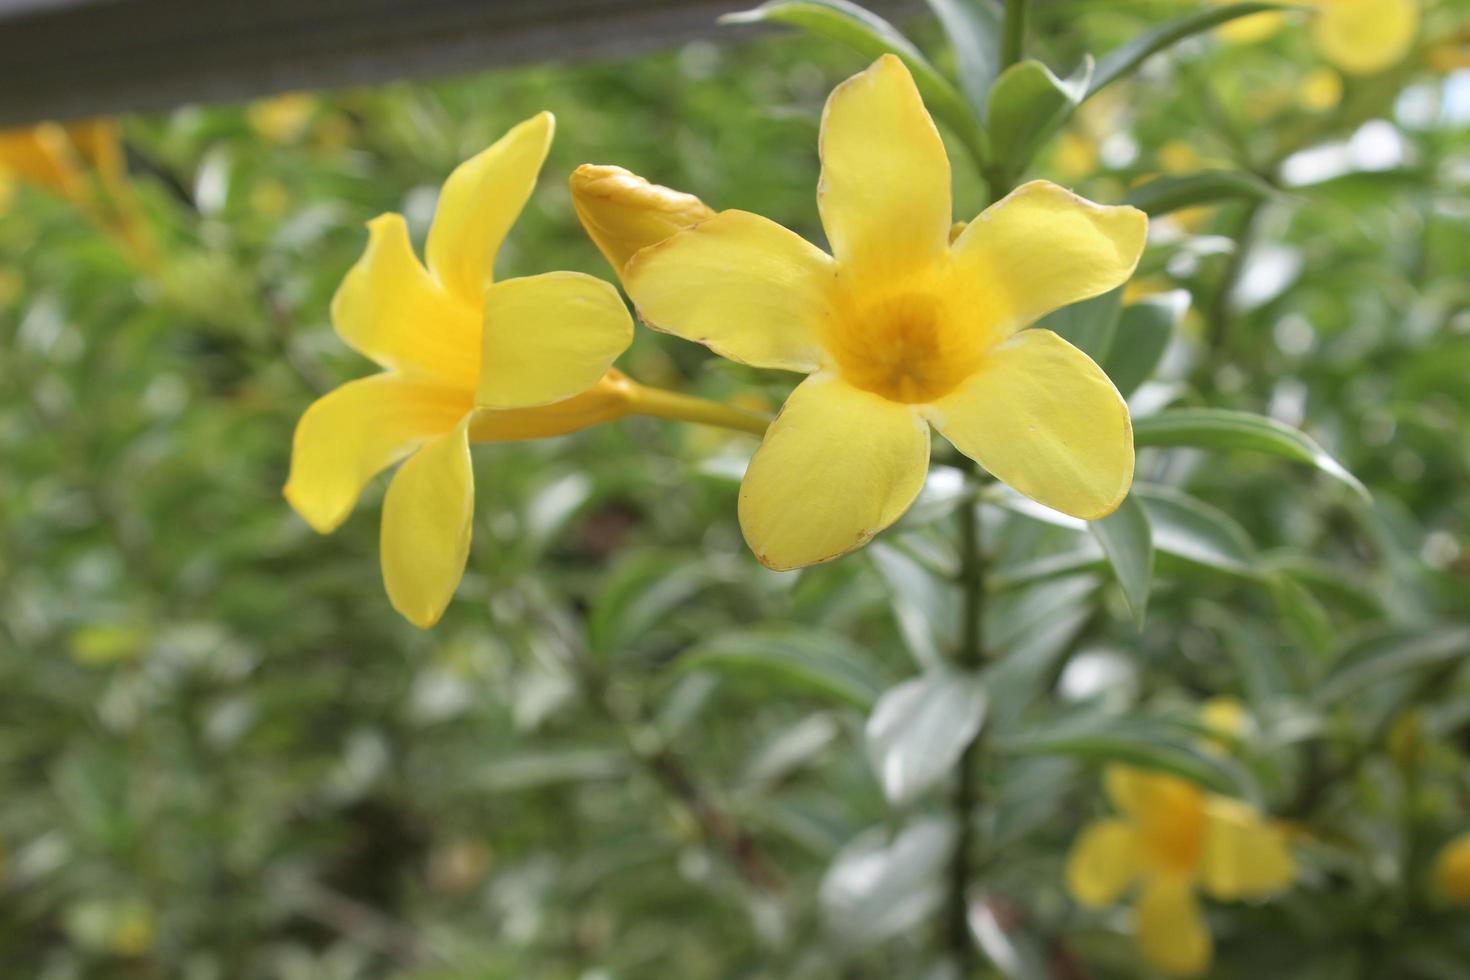 Close up of beautiful Allamanda cathartica flower in garden. This flower is also called the golden trumpet flower, yellow bell flower or buttercup flower. Usually used for ornamental plants outdoors. photo